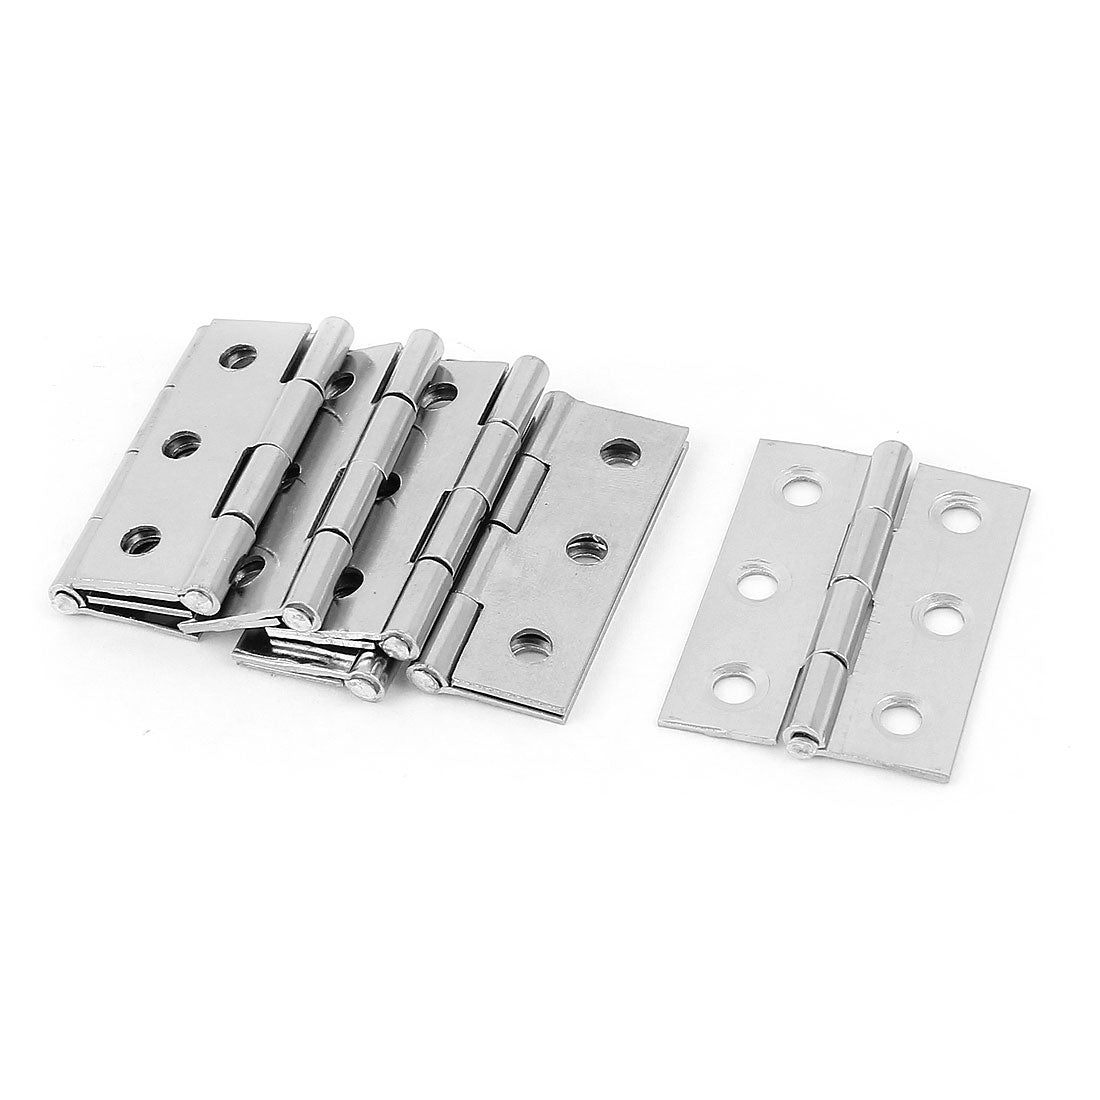 uxcell Uxcell 7 Pcs 1.7" x 1.2" Stainless Steel Folding Furniture Cabinet Door Hinge